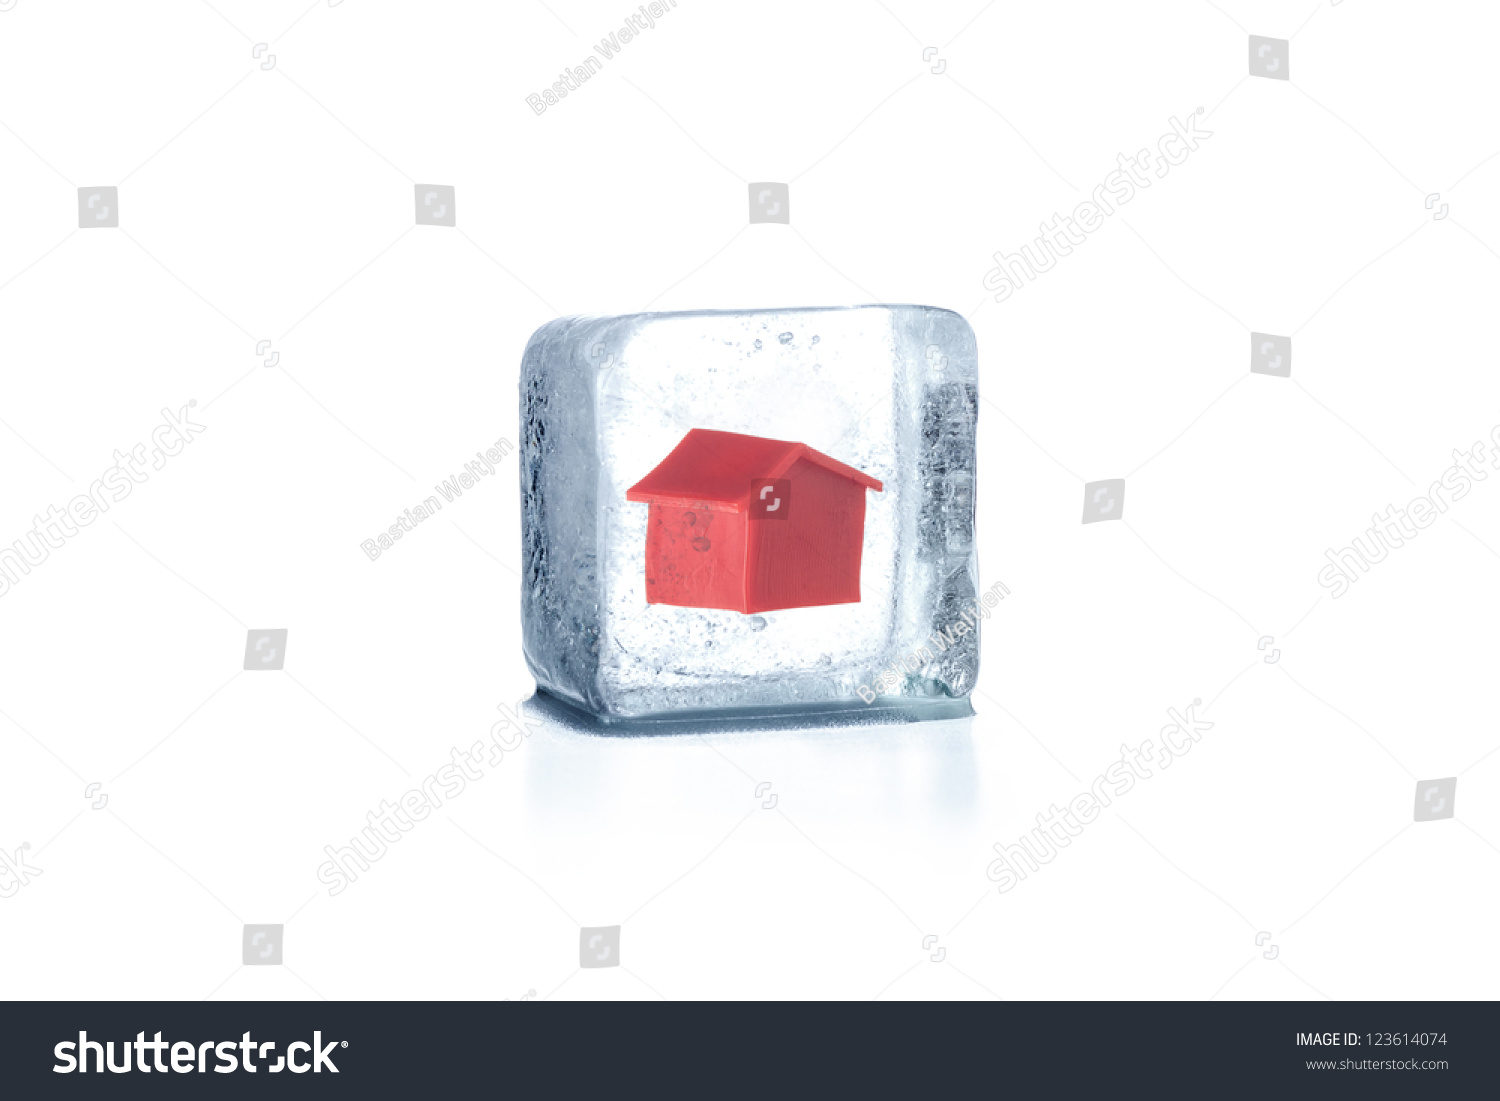 House frozen in ice cube #123614074